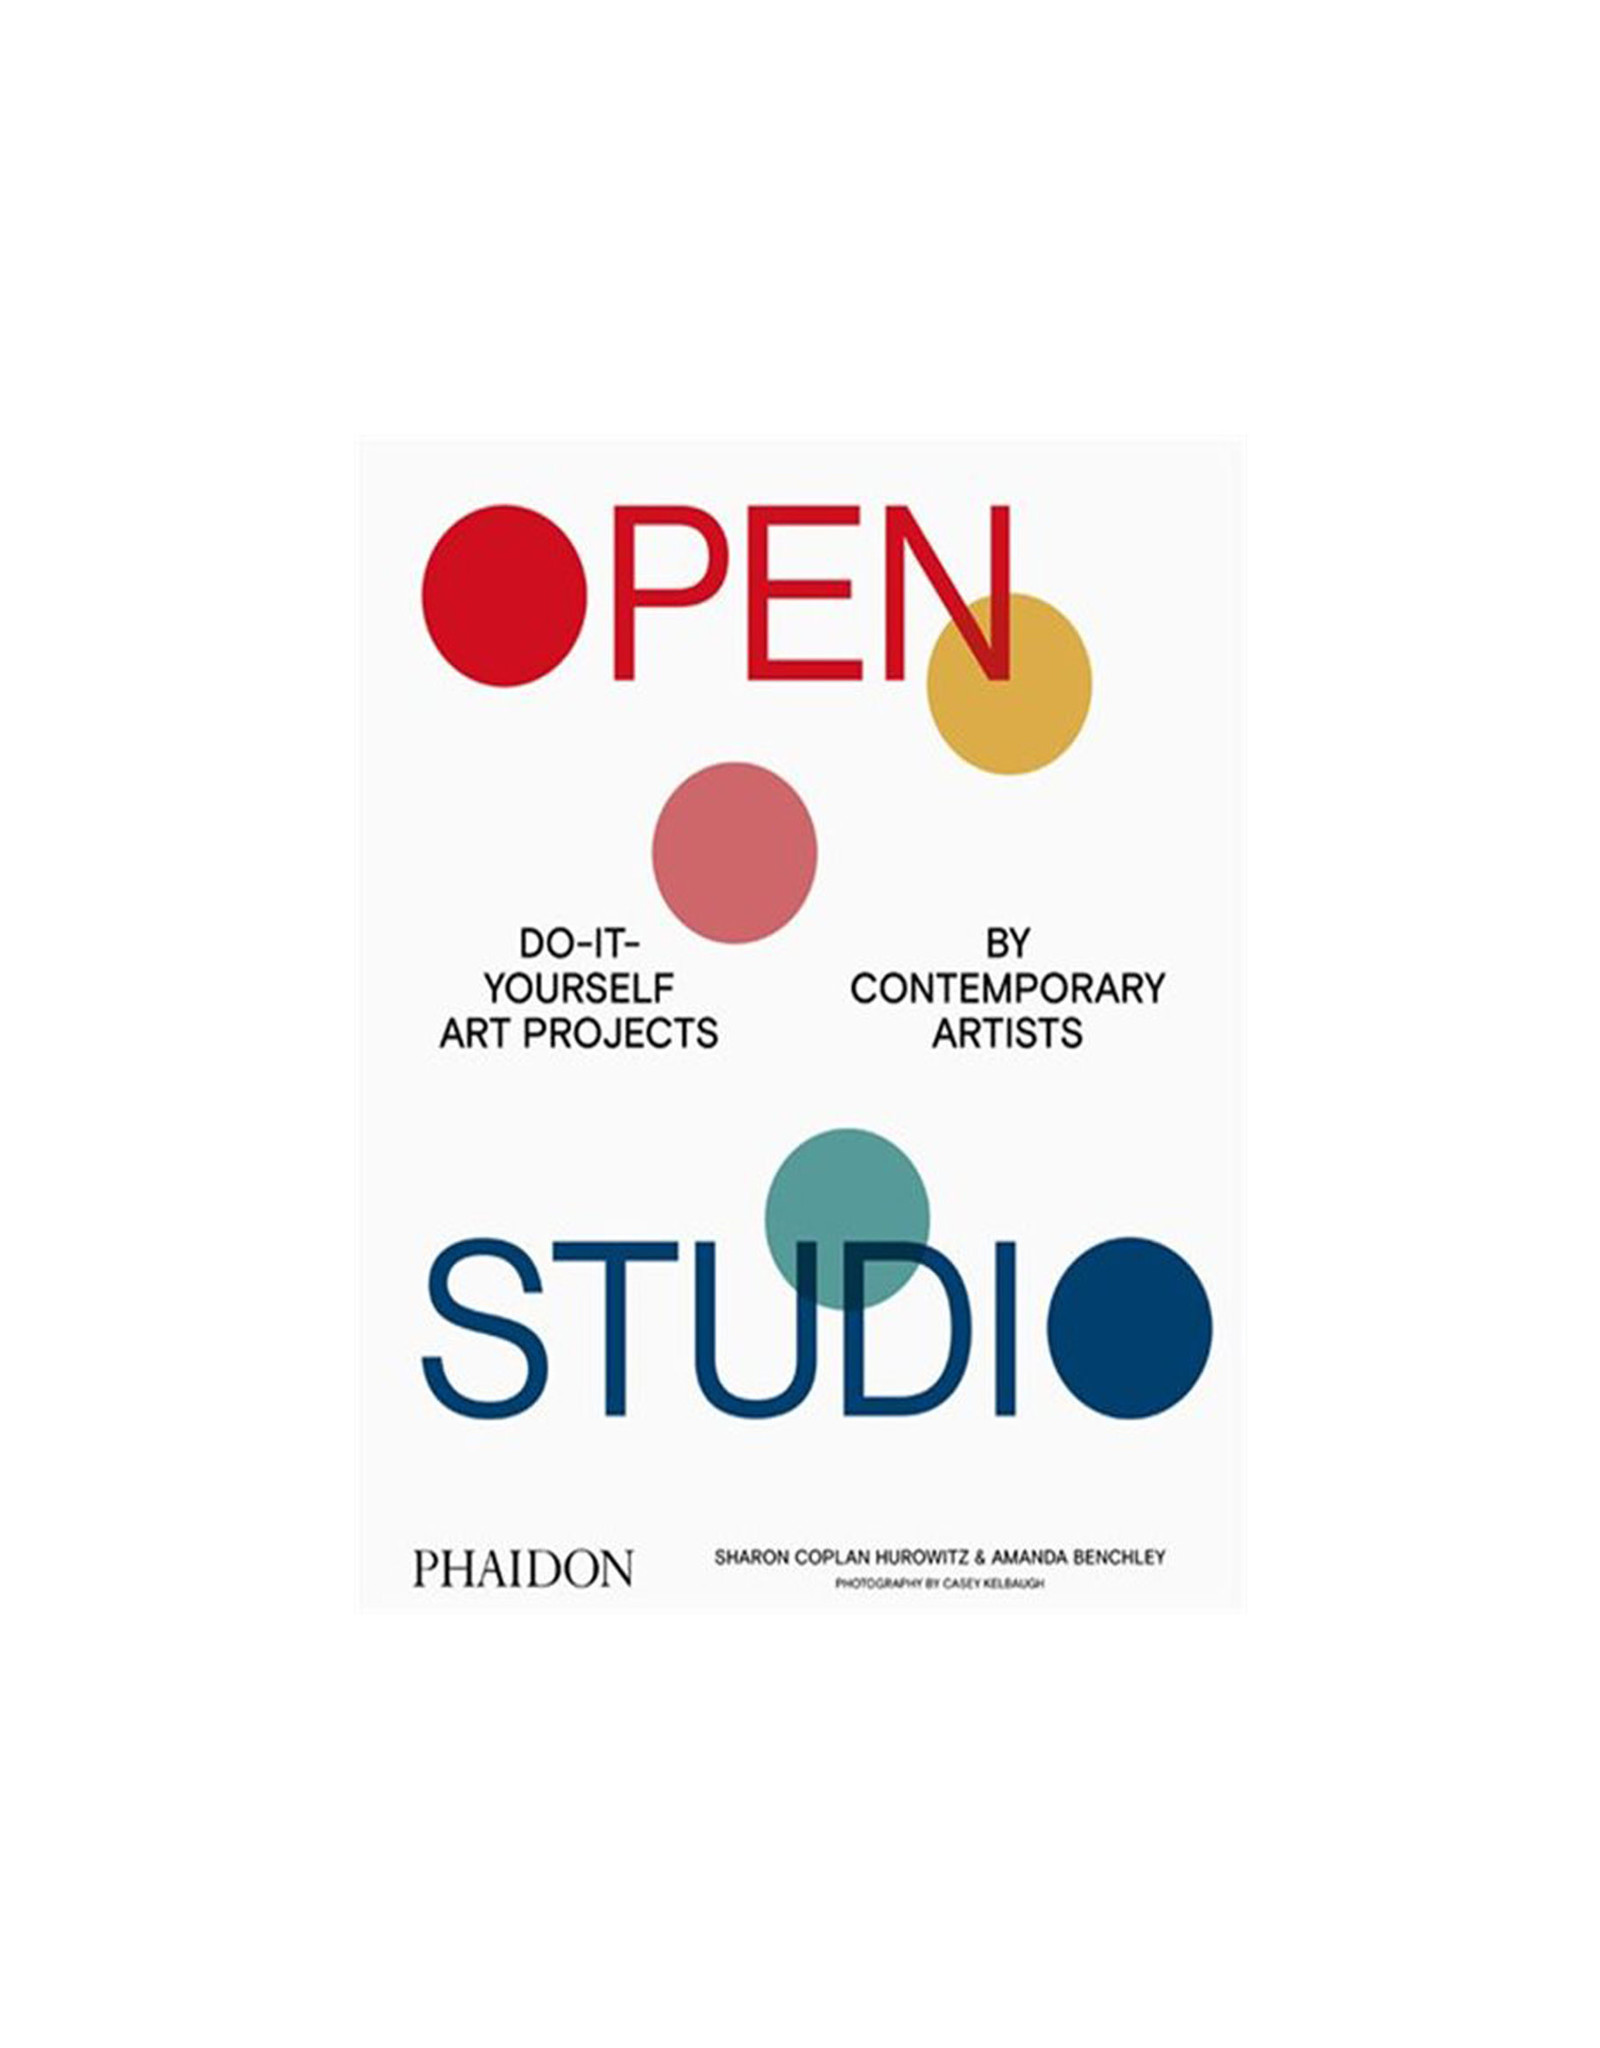 Open Studio: Do-It-Yourself Art Projects by Contemporary Artists